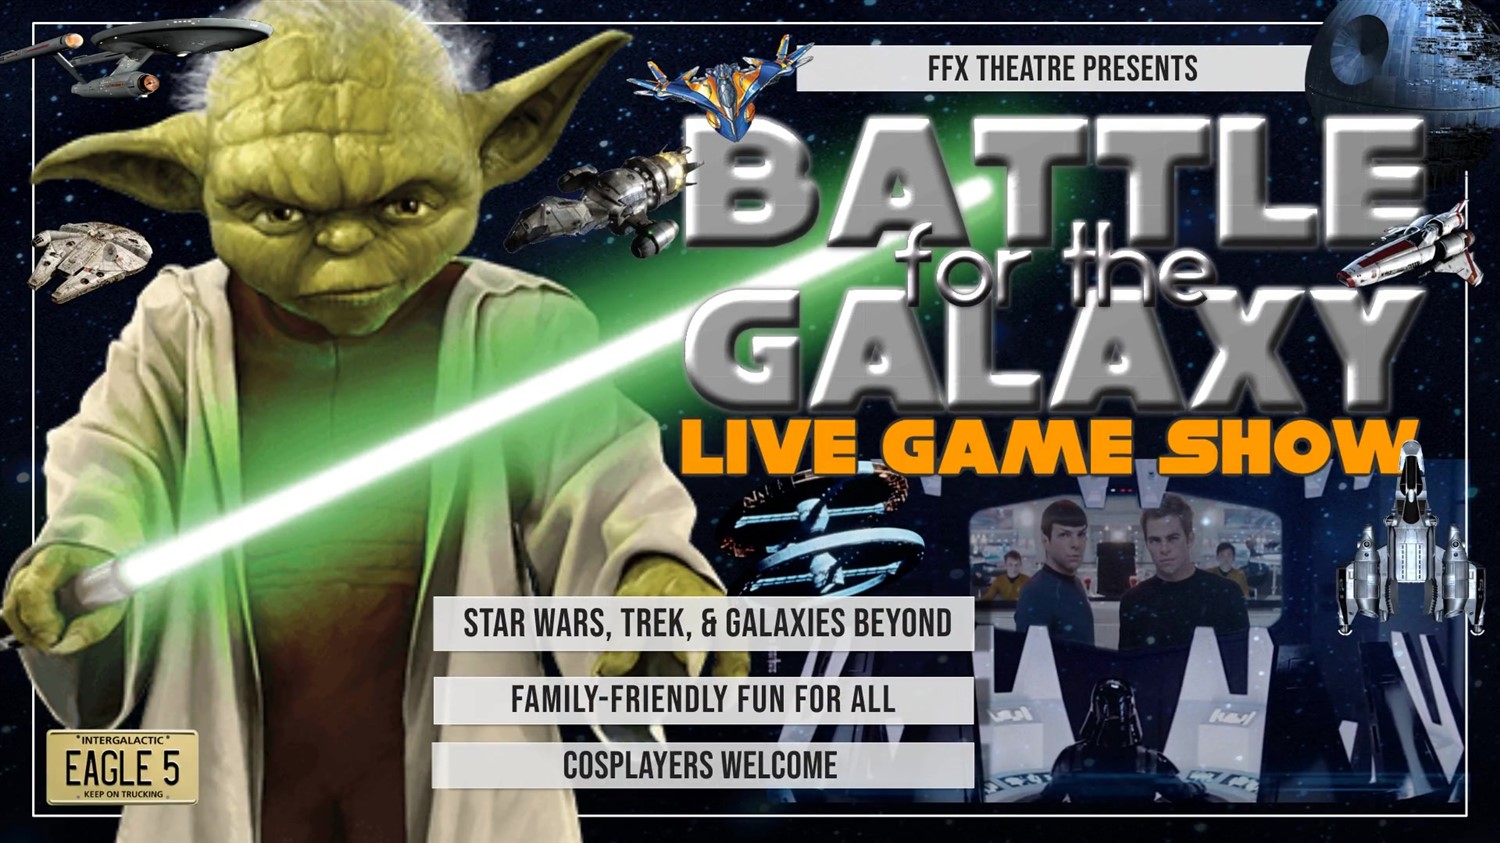 Battle for the Galaxy: LIVE GAME SHOW Sci-Fun Fun! on Feb 24, 19:00@FFX Theatre - Pick a seat, Buy tickets and Get information on Family Fun Xperience tickets.ffxshow.org